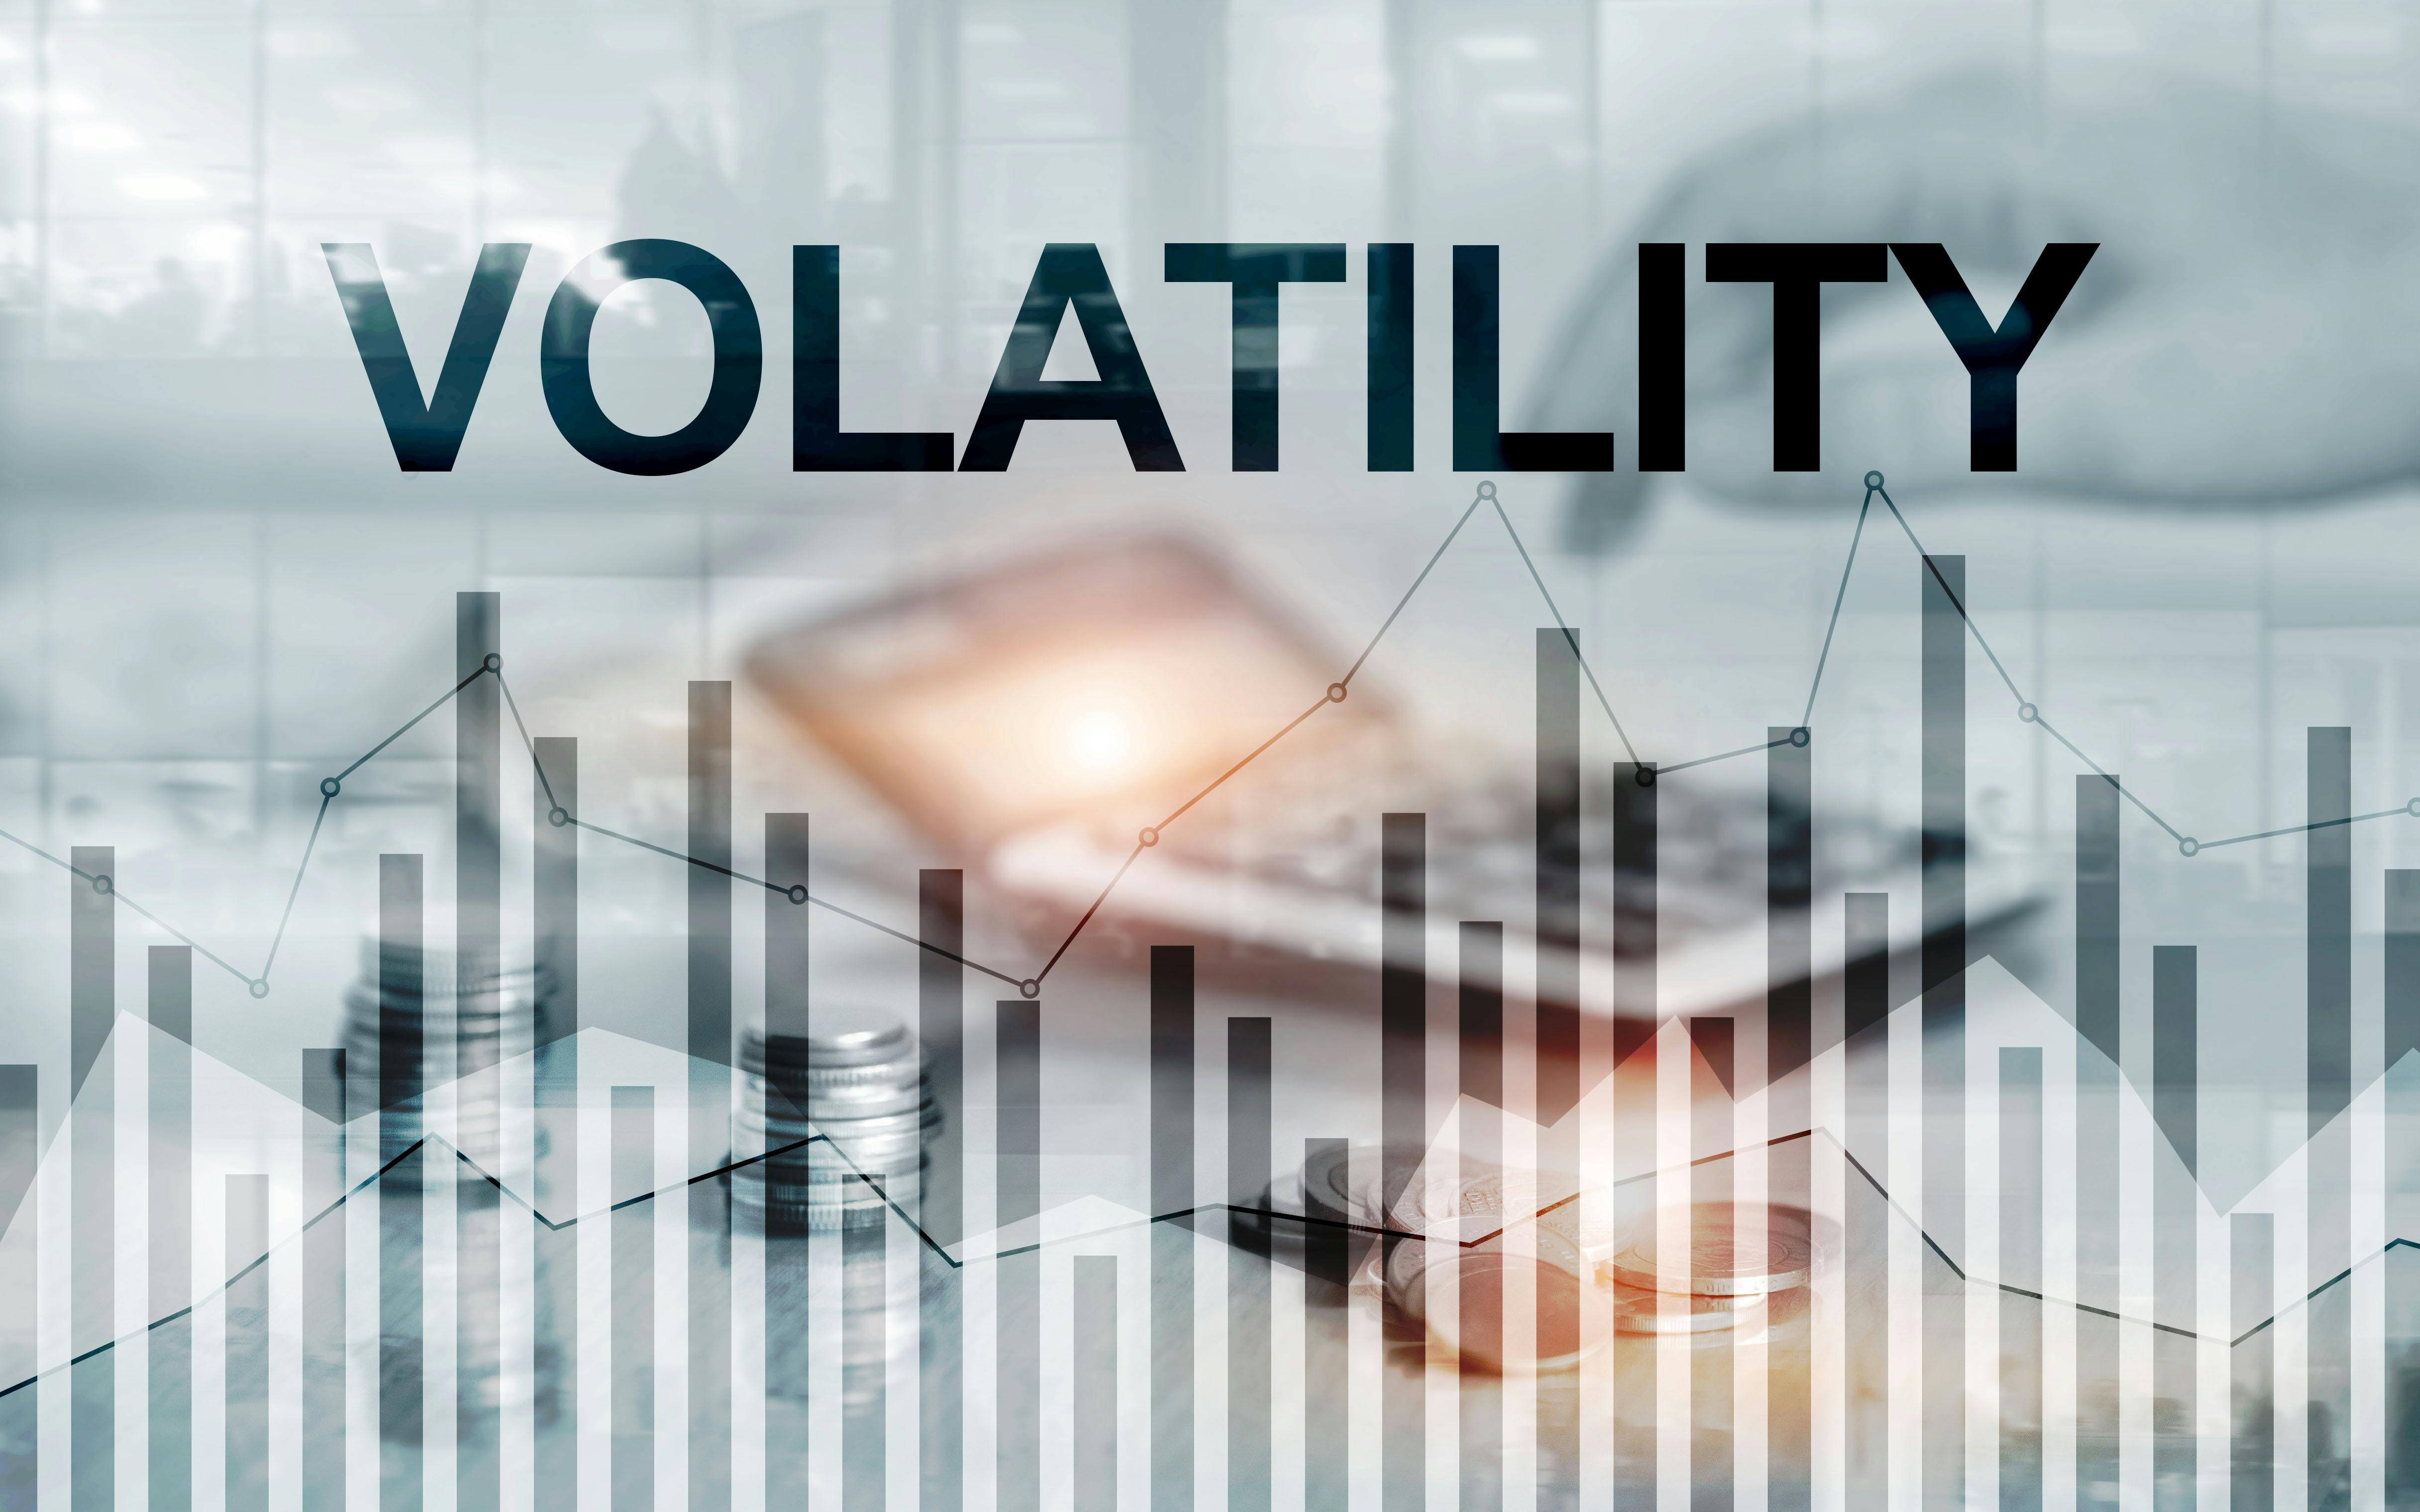 What is Volatility?